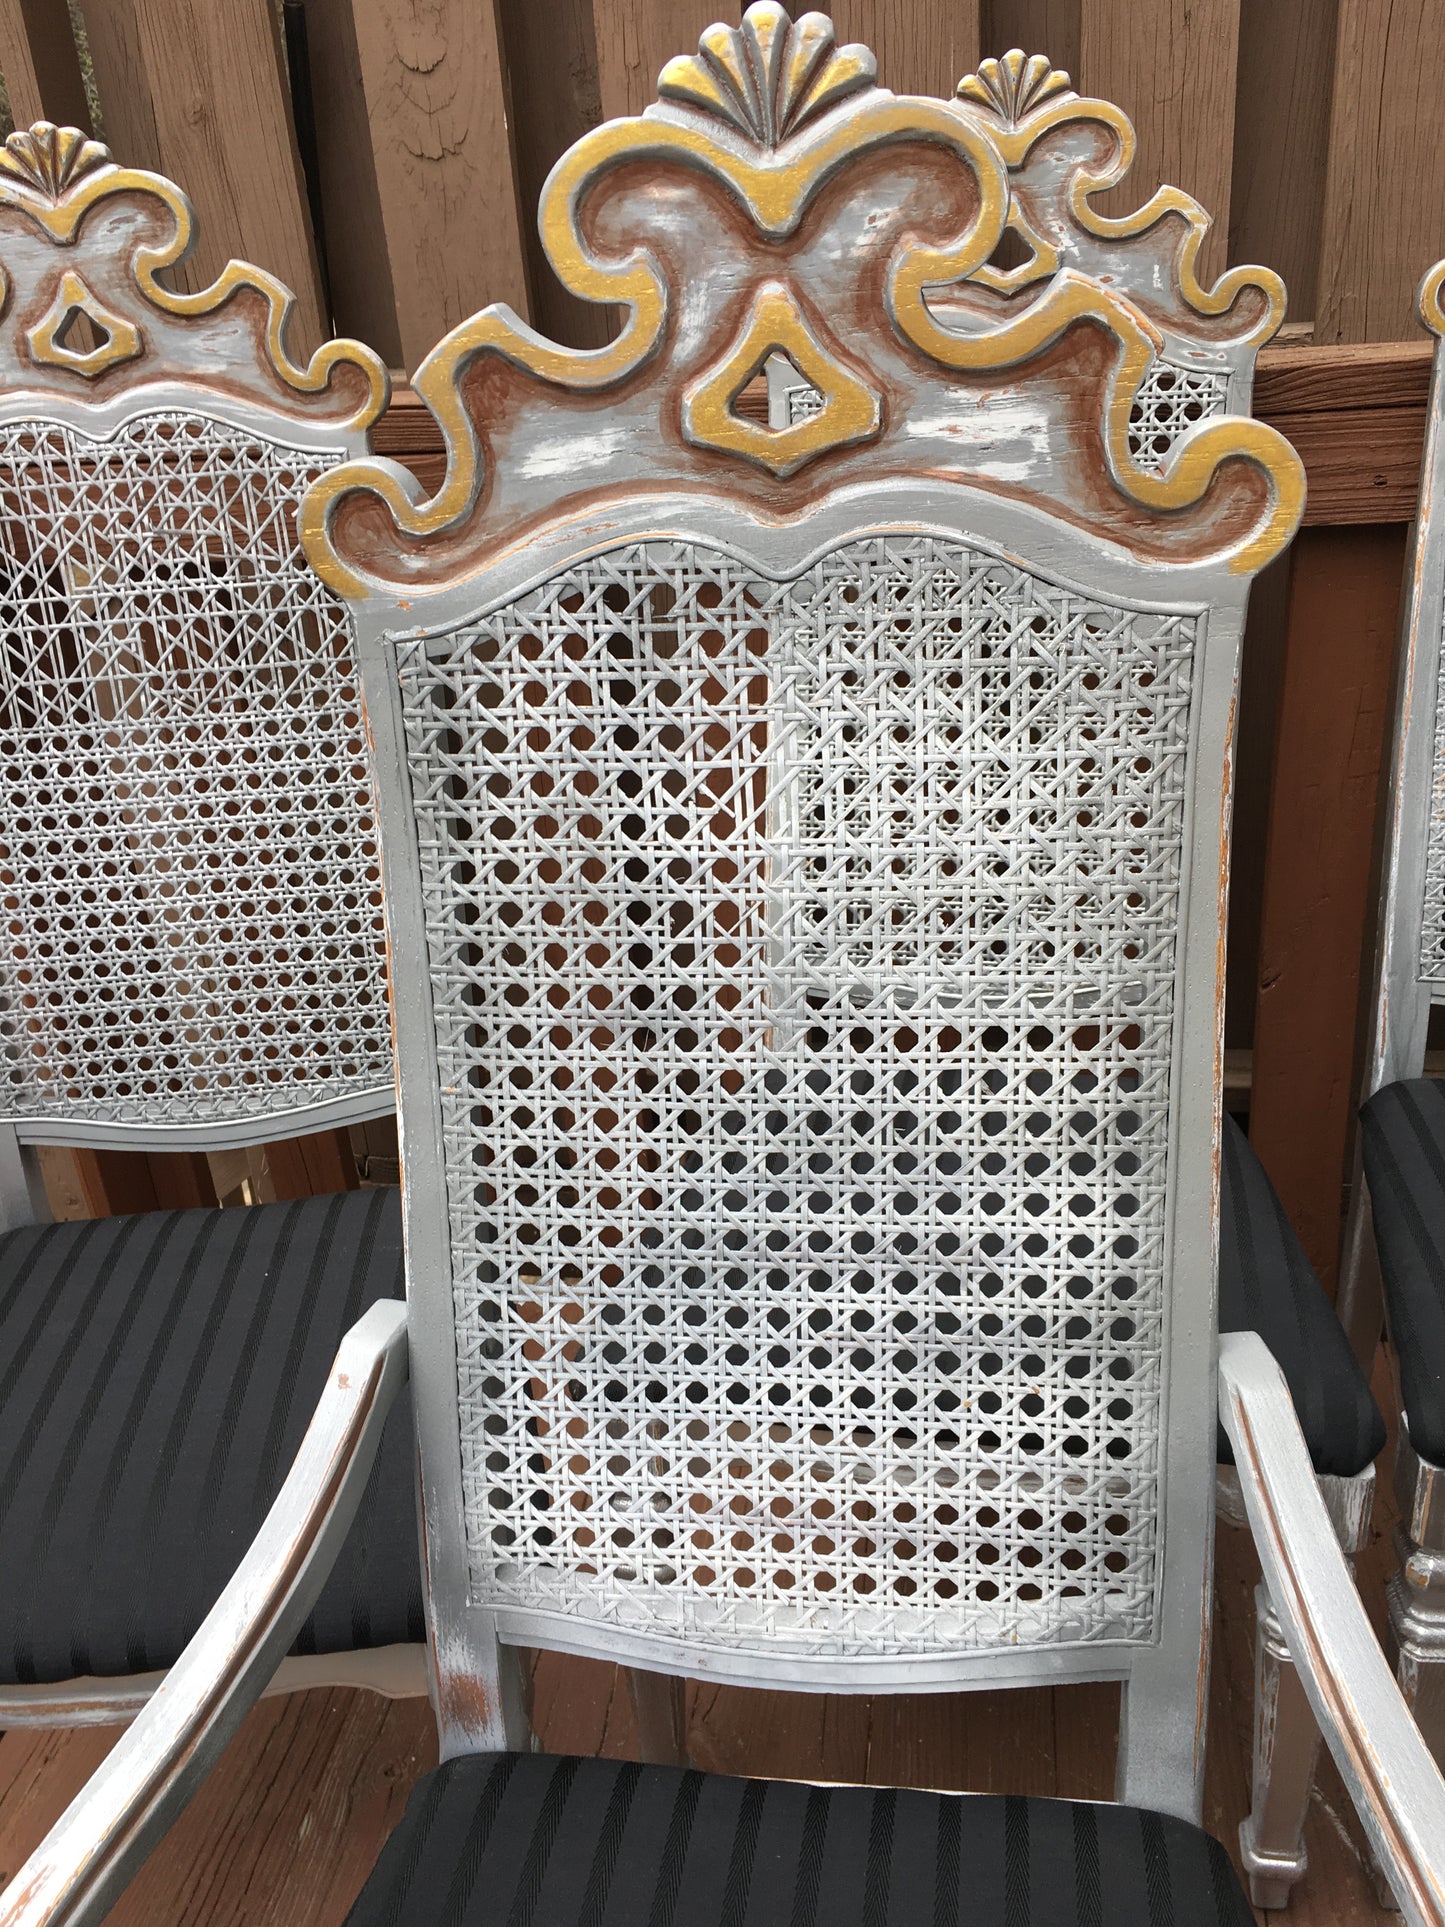 [SOLD] Gilt Painted Gothic Cane Dining Chairs - Set of 6